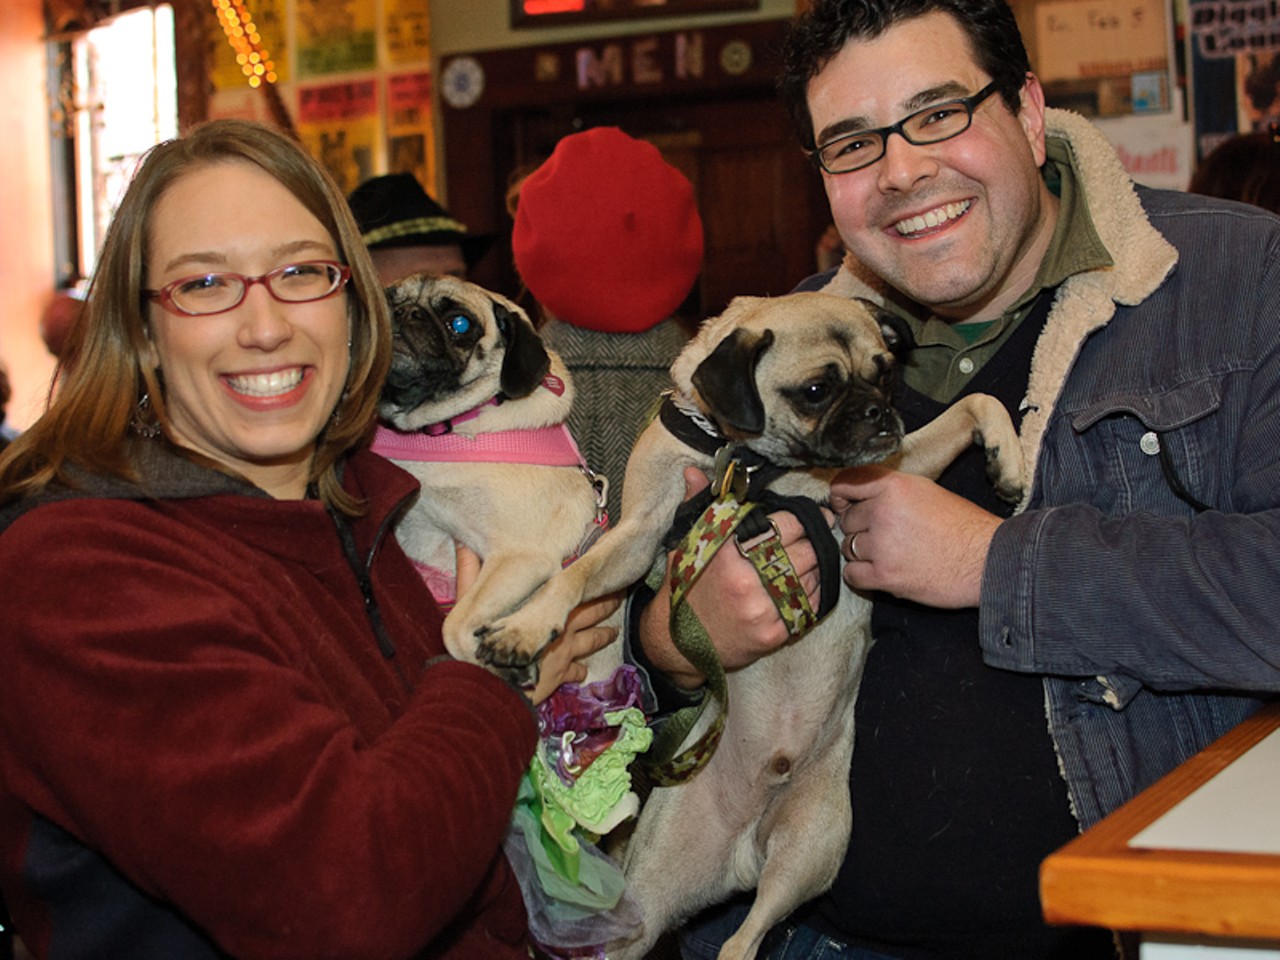 Lisa and Chris stopped by The Shanti for some Taste of Soulard delights -- and brought Mabel and Mo along for the ride.